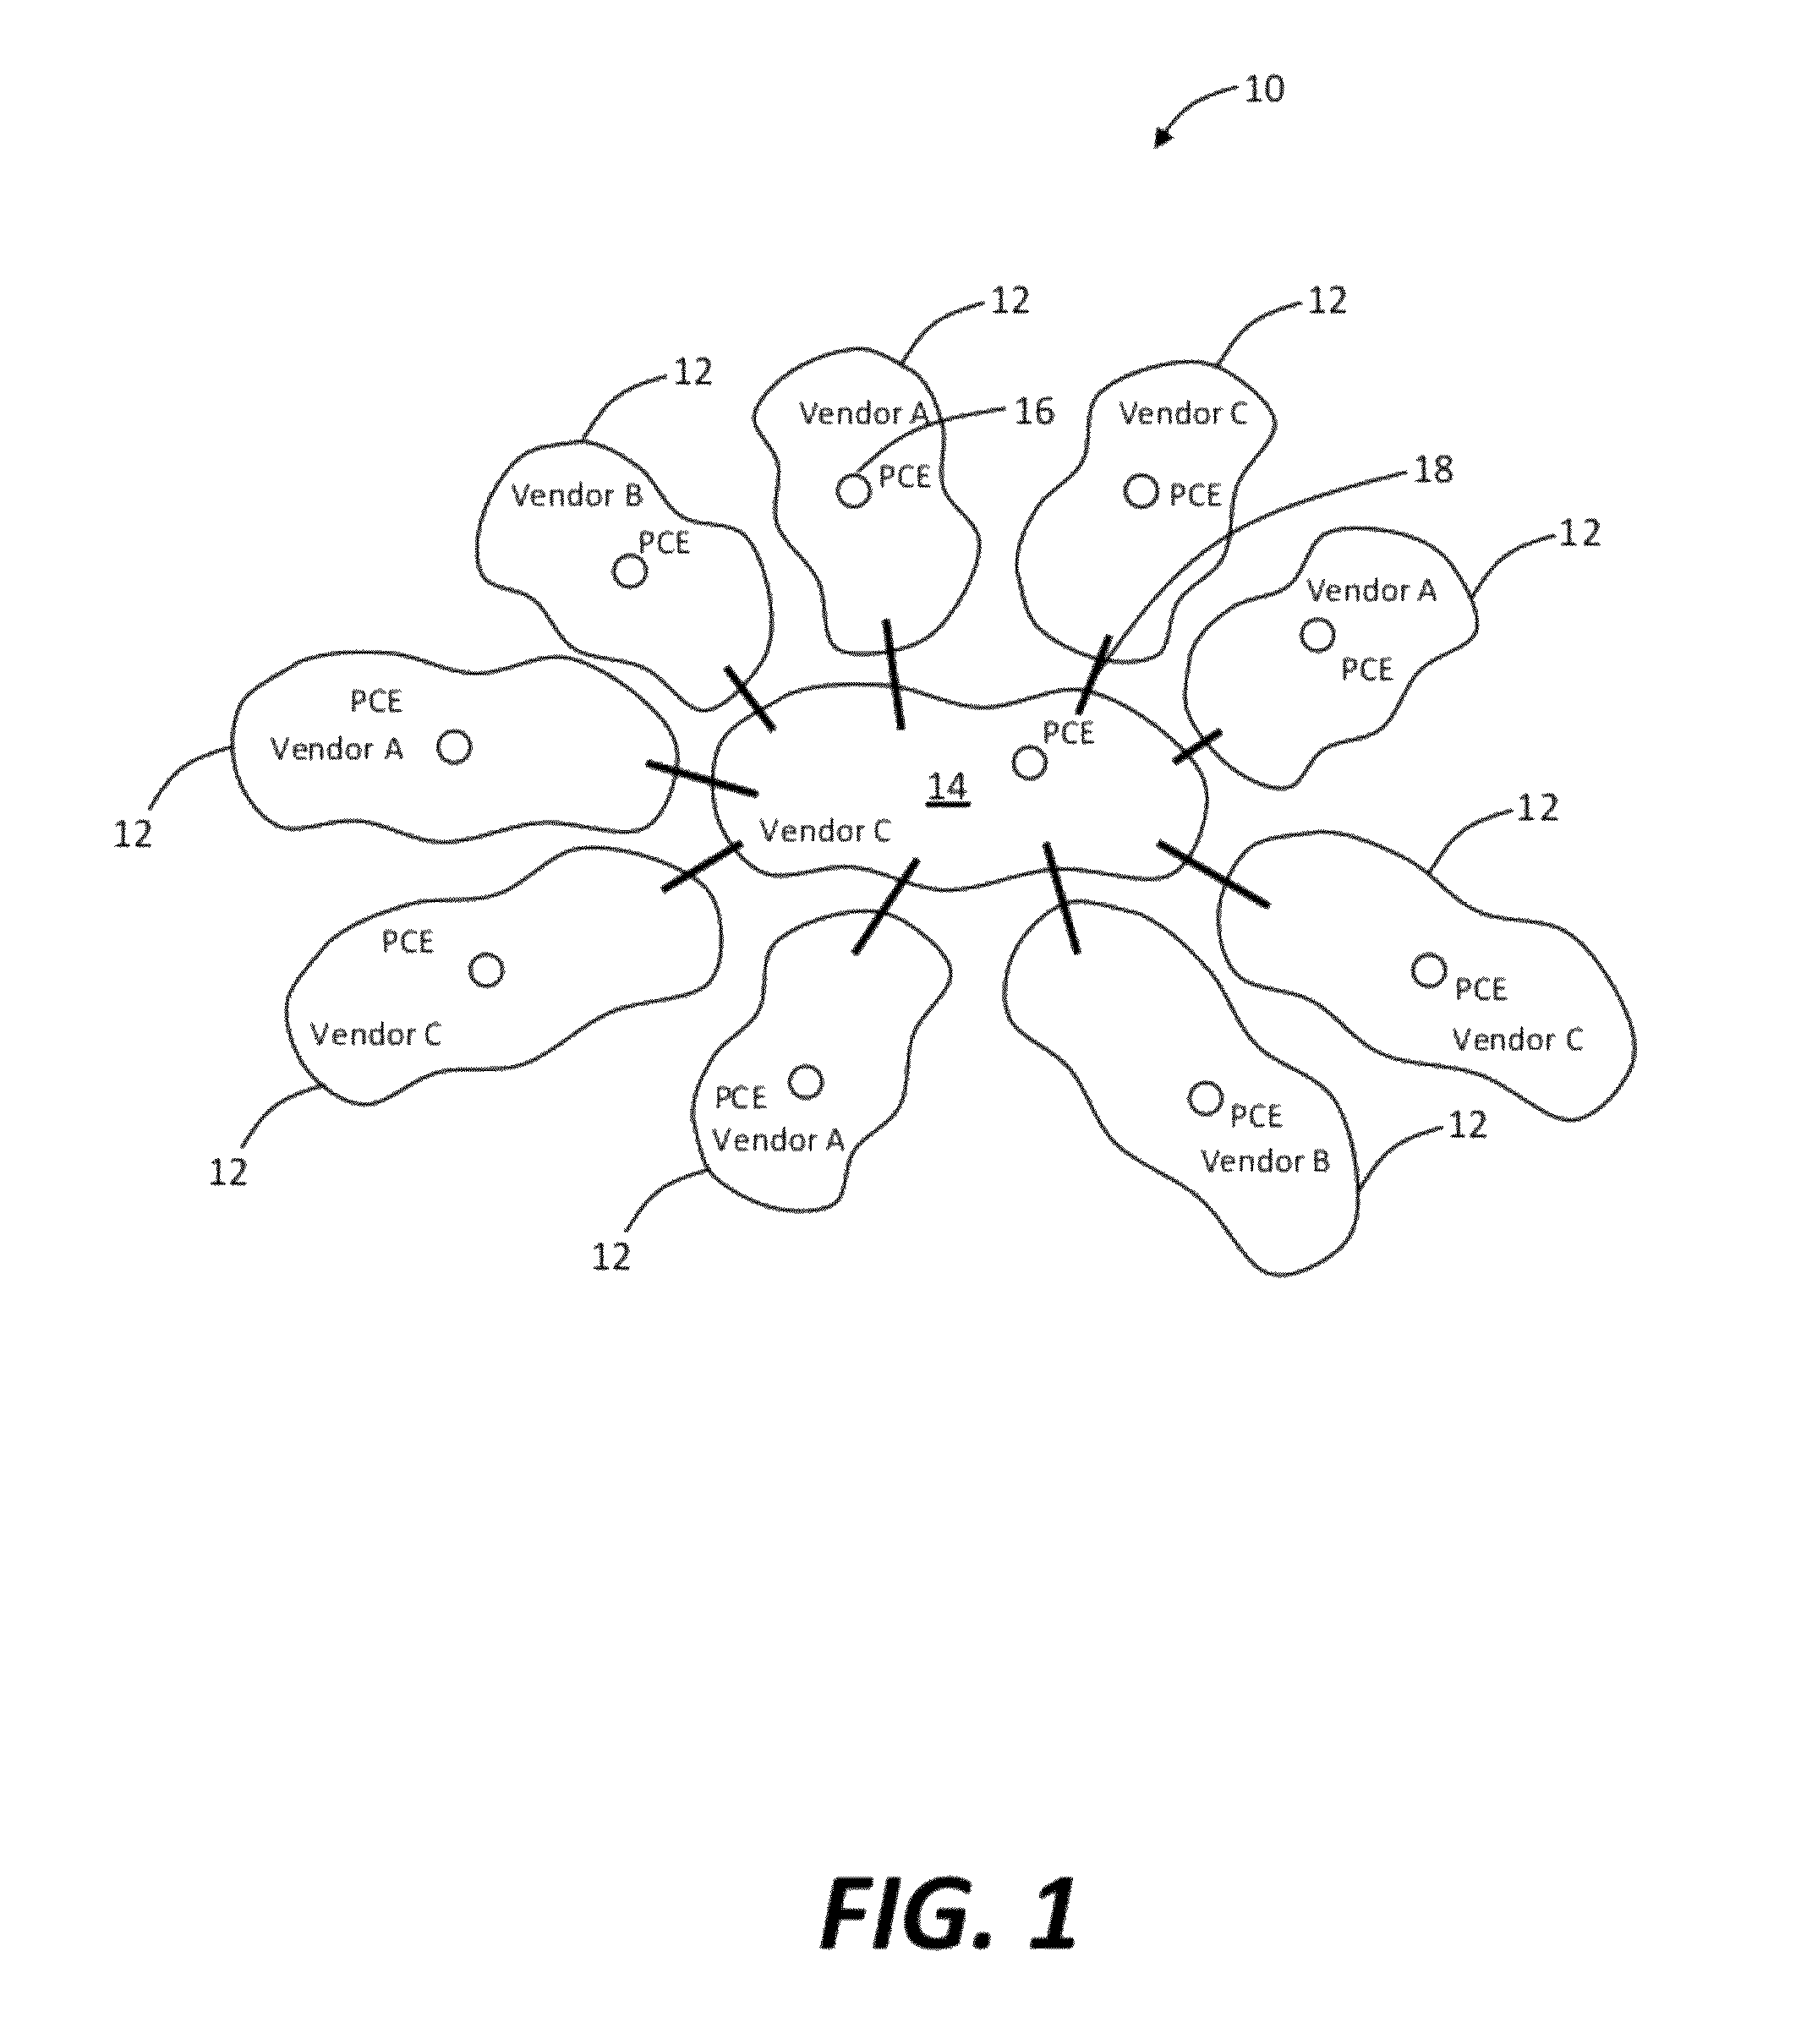 Distributed network planning systems and methods